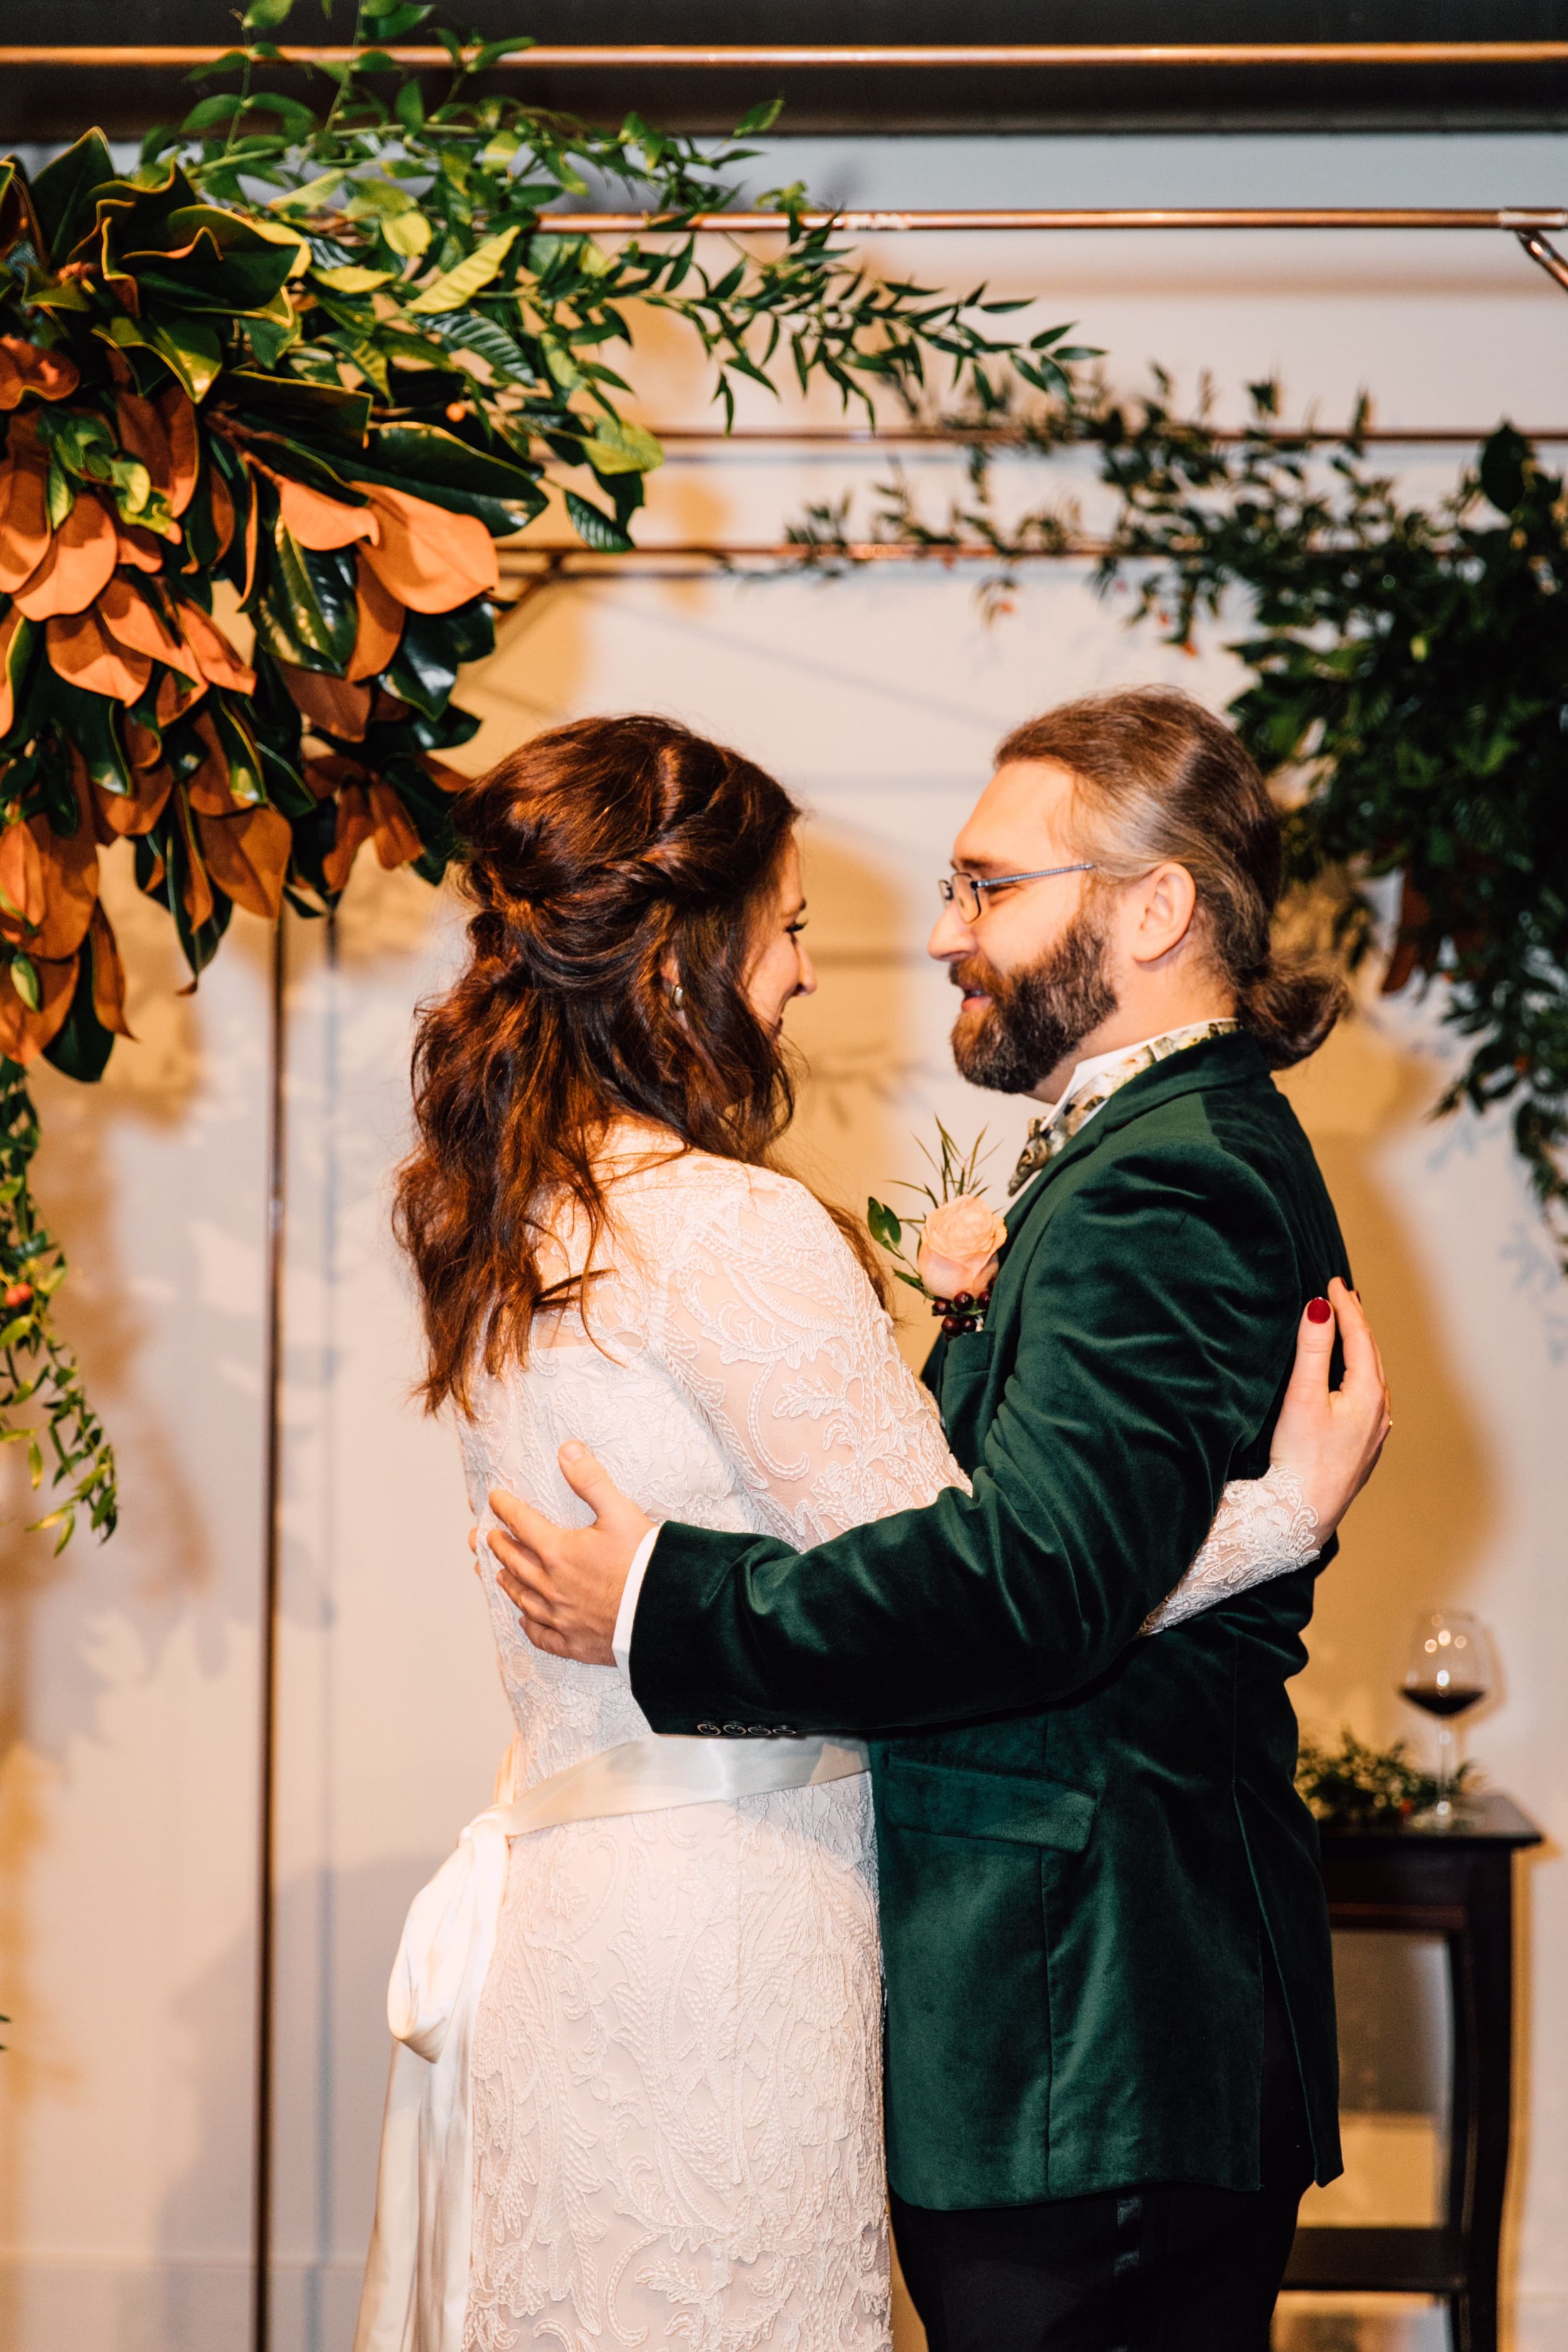  syracuse wedding photographer captures the moment after the newlyweds share their first kiss as they are in an embrace and smiling wide at each other 